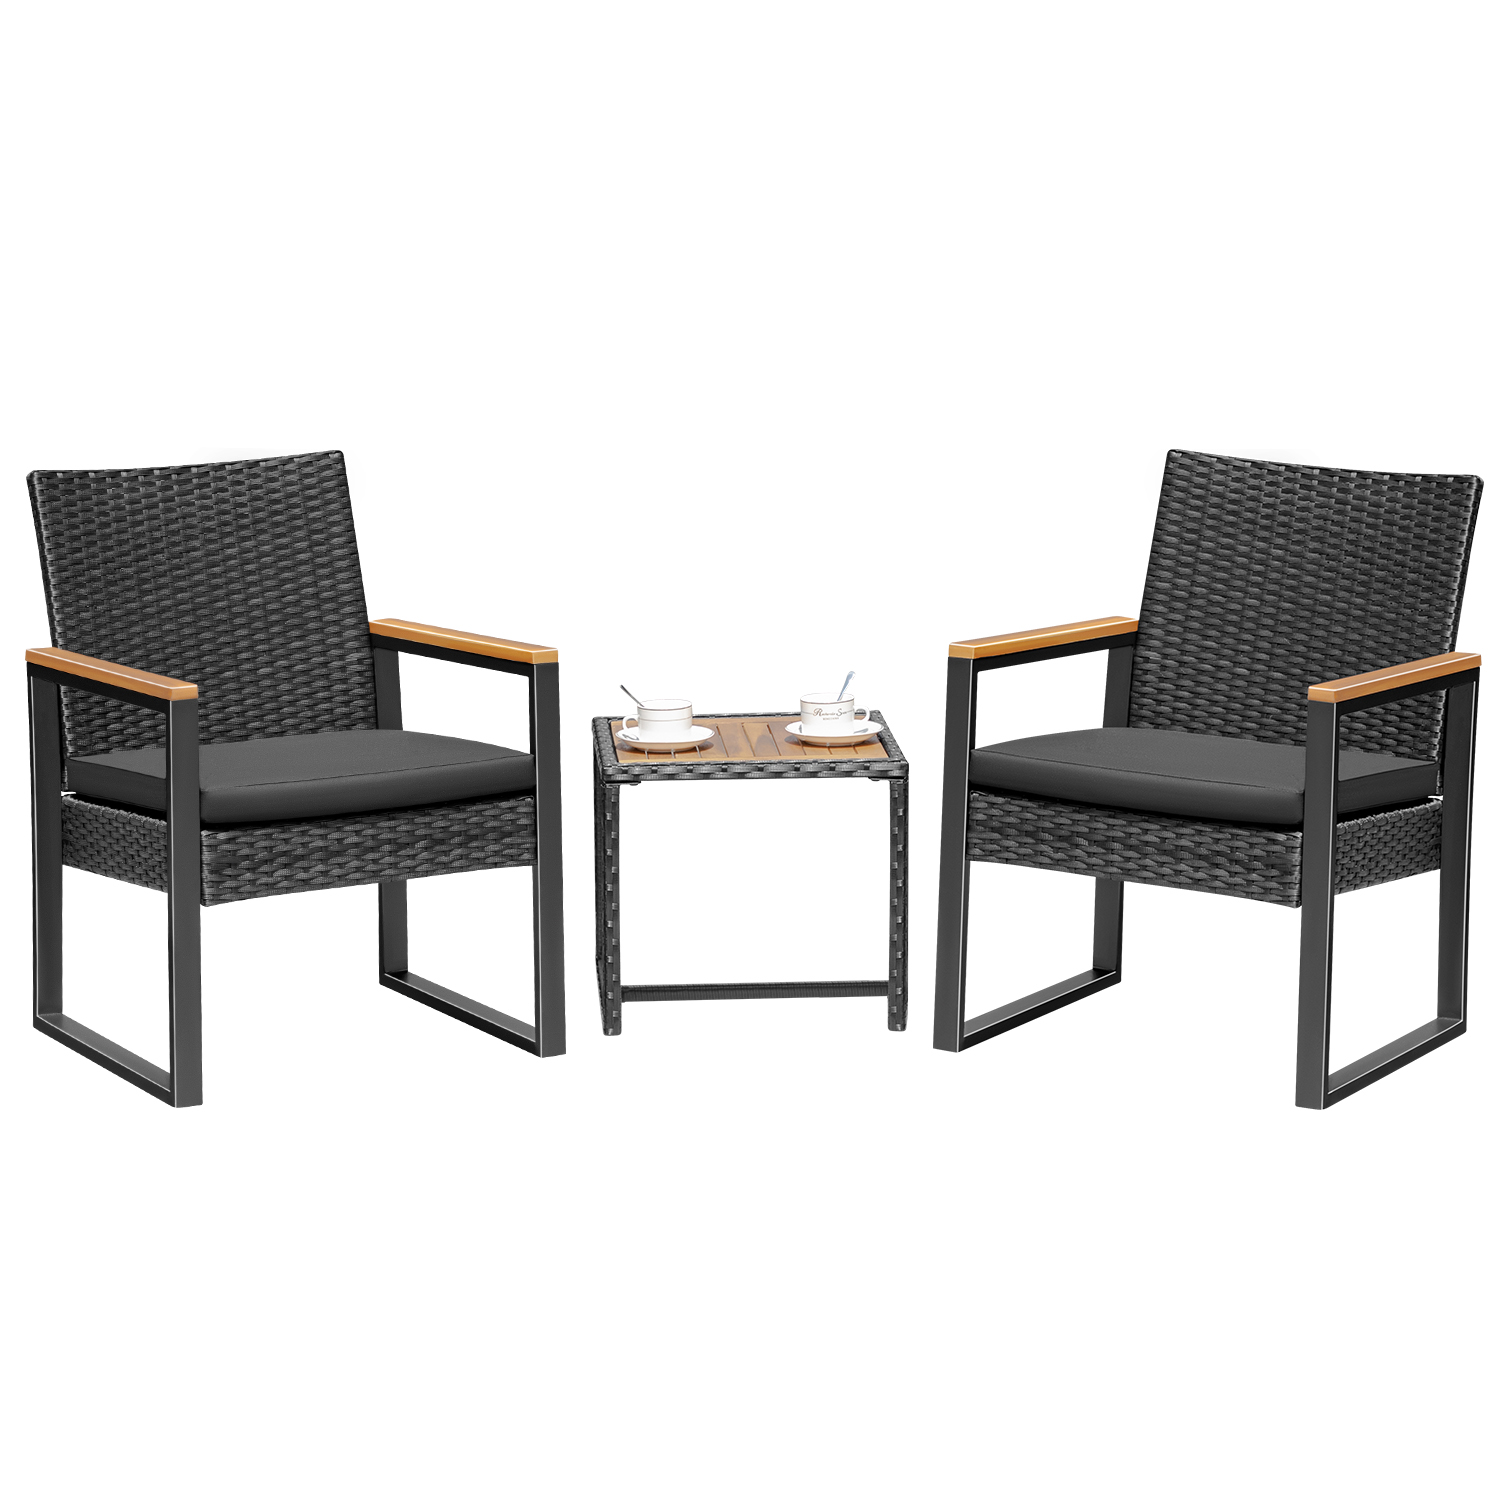 Devoko 3 Pieces Patio Conversation Set Outdoor Rattan Chair Set of 2 with Wood Coffee Table, Black - image 2 of 7